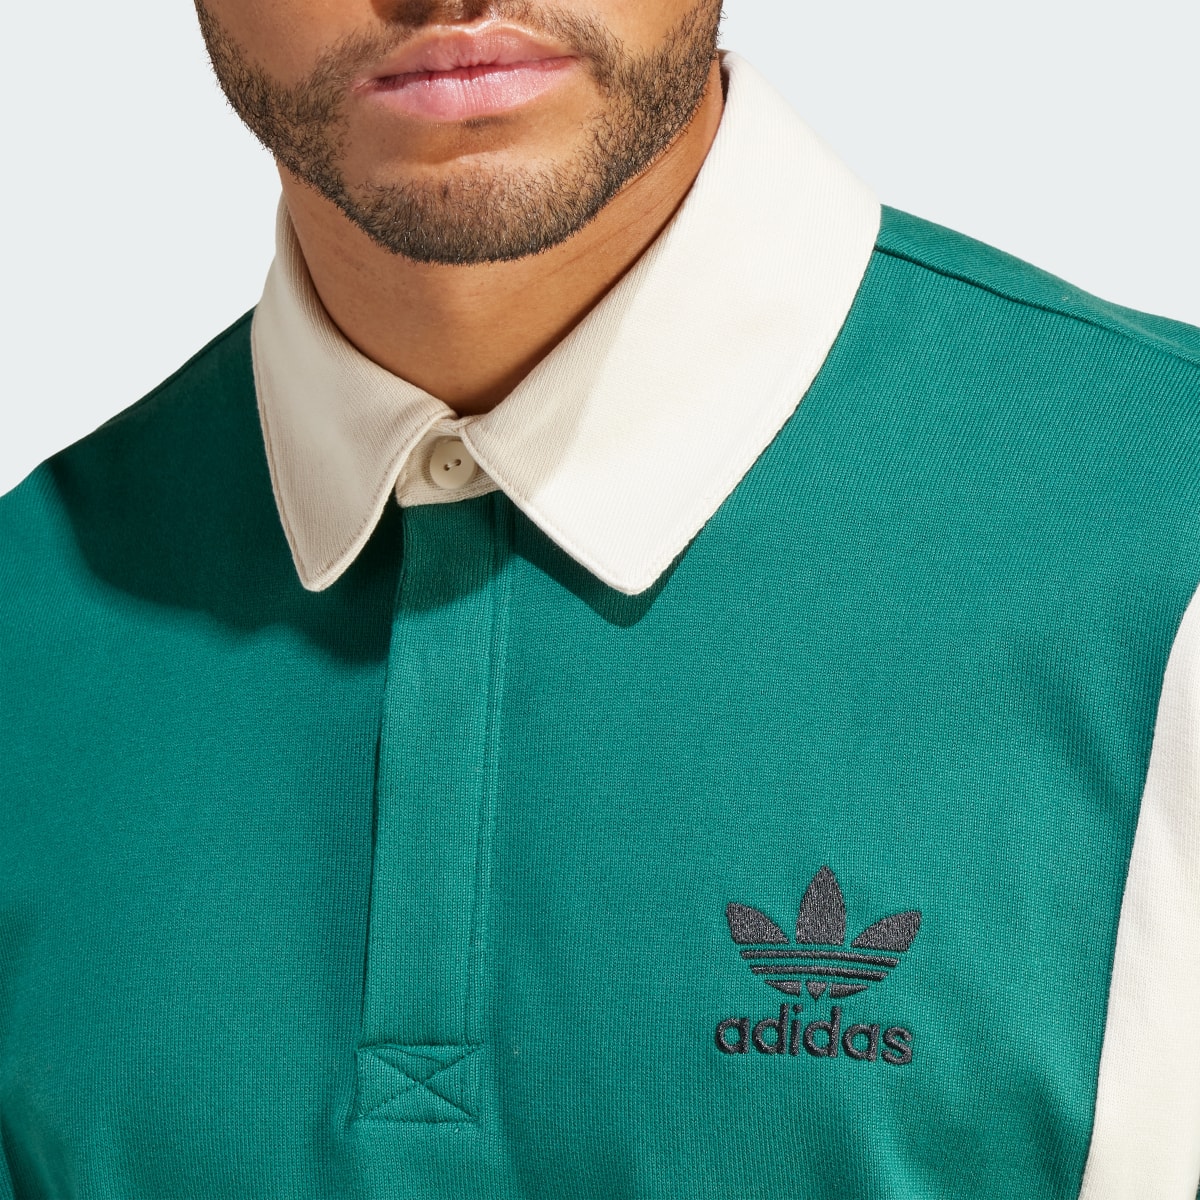 Adidas Polo Rugby. 6